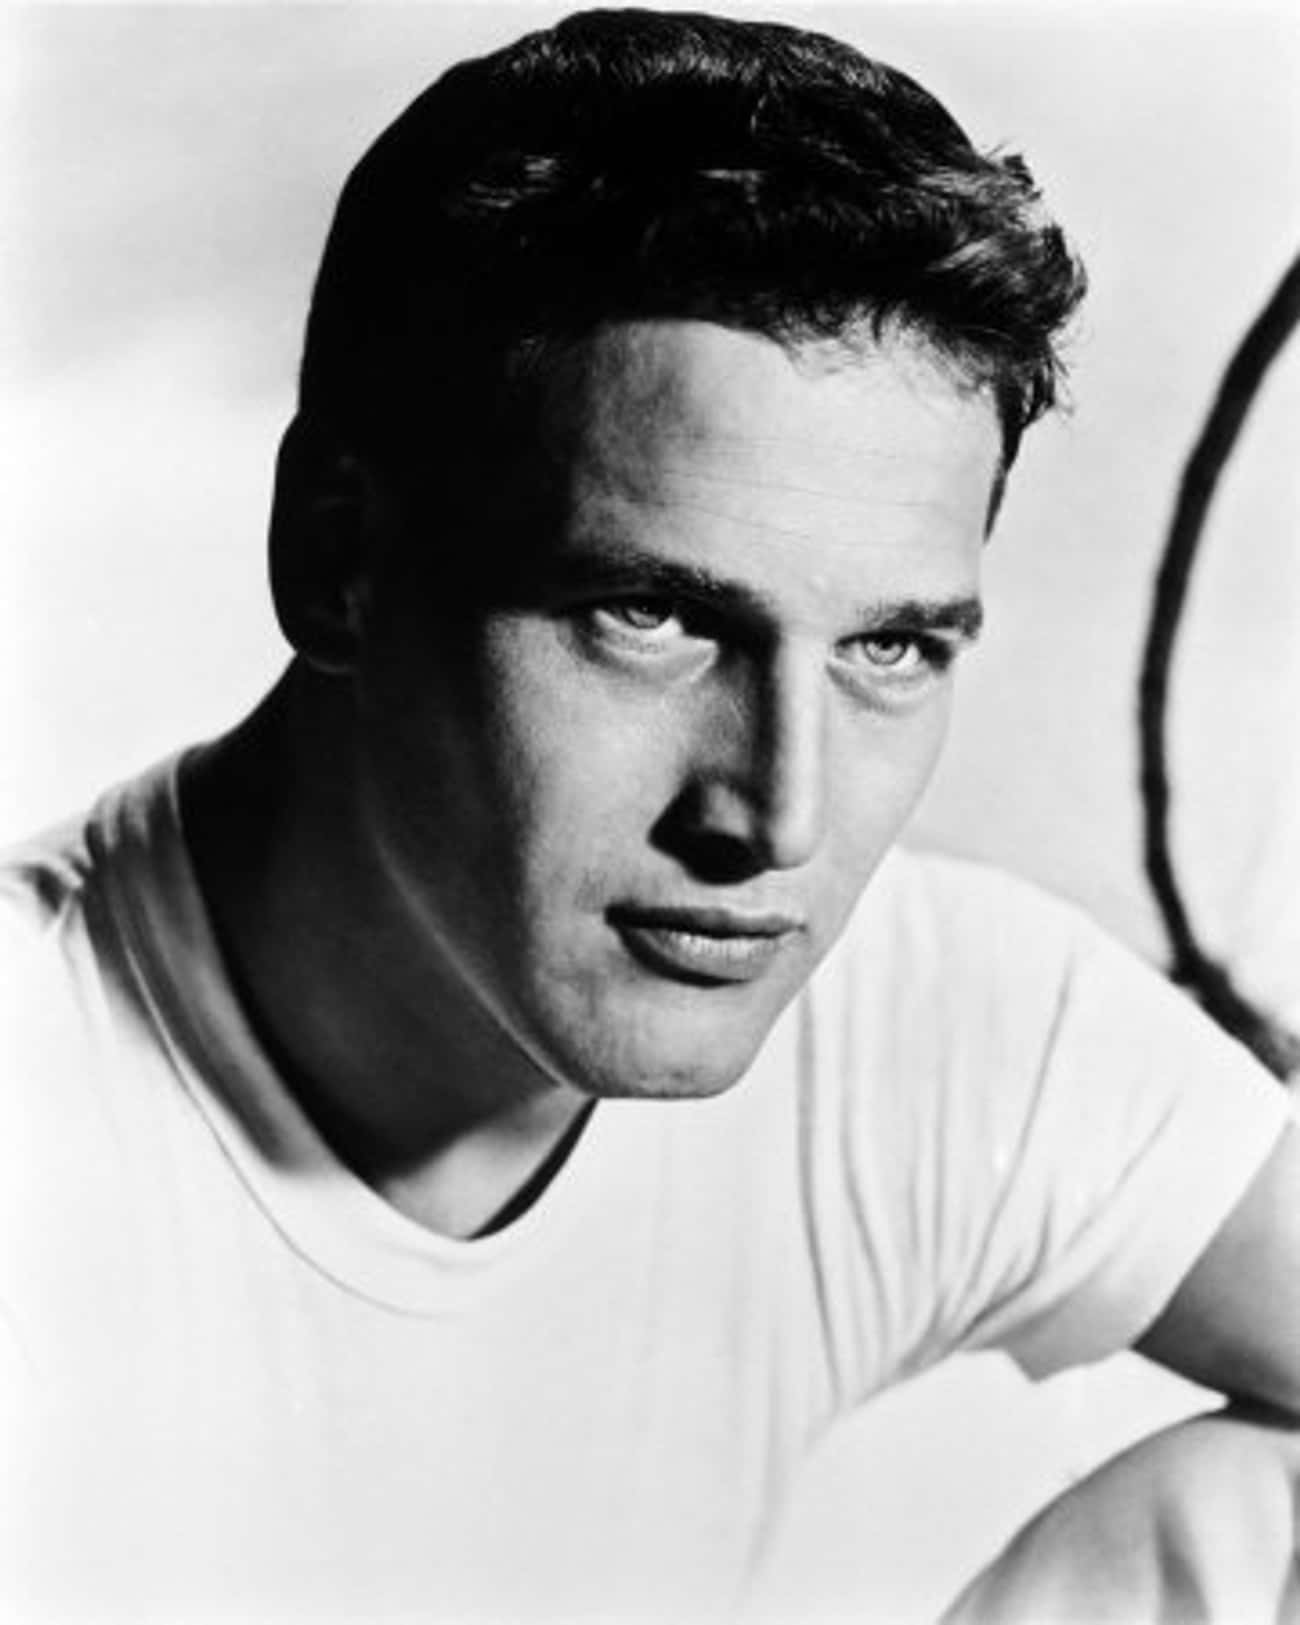 Young Paul Newman in White Shirt